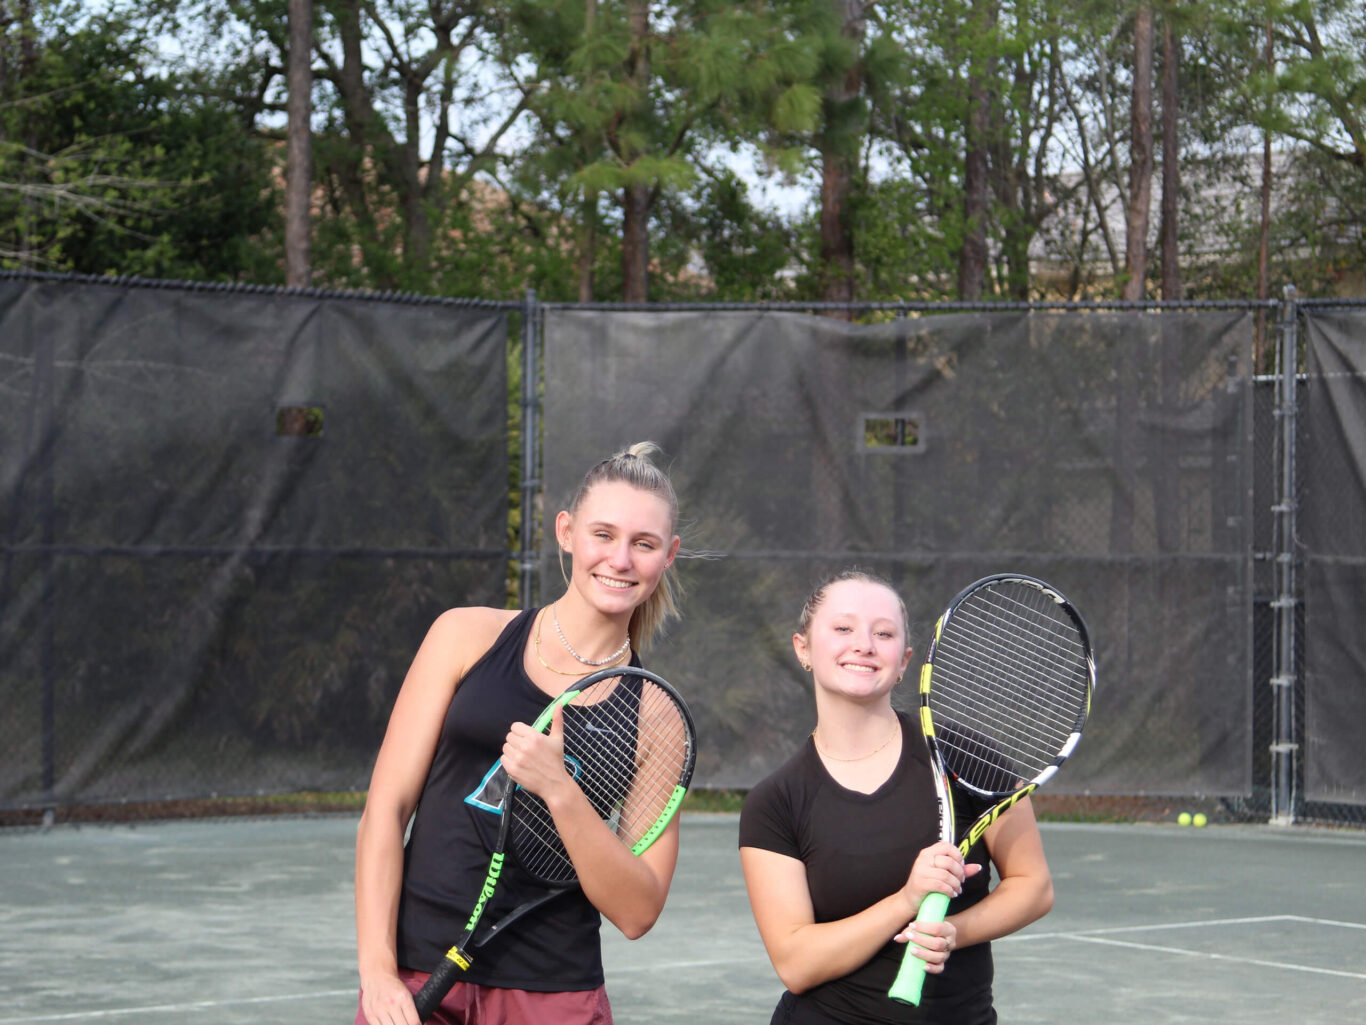 Two girls holding tennis rackets on a tennis court.